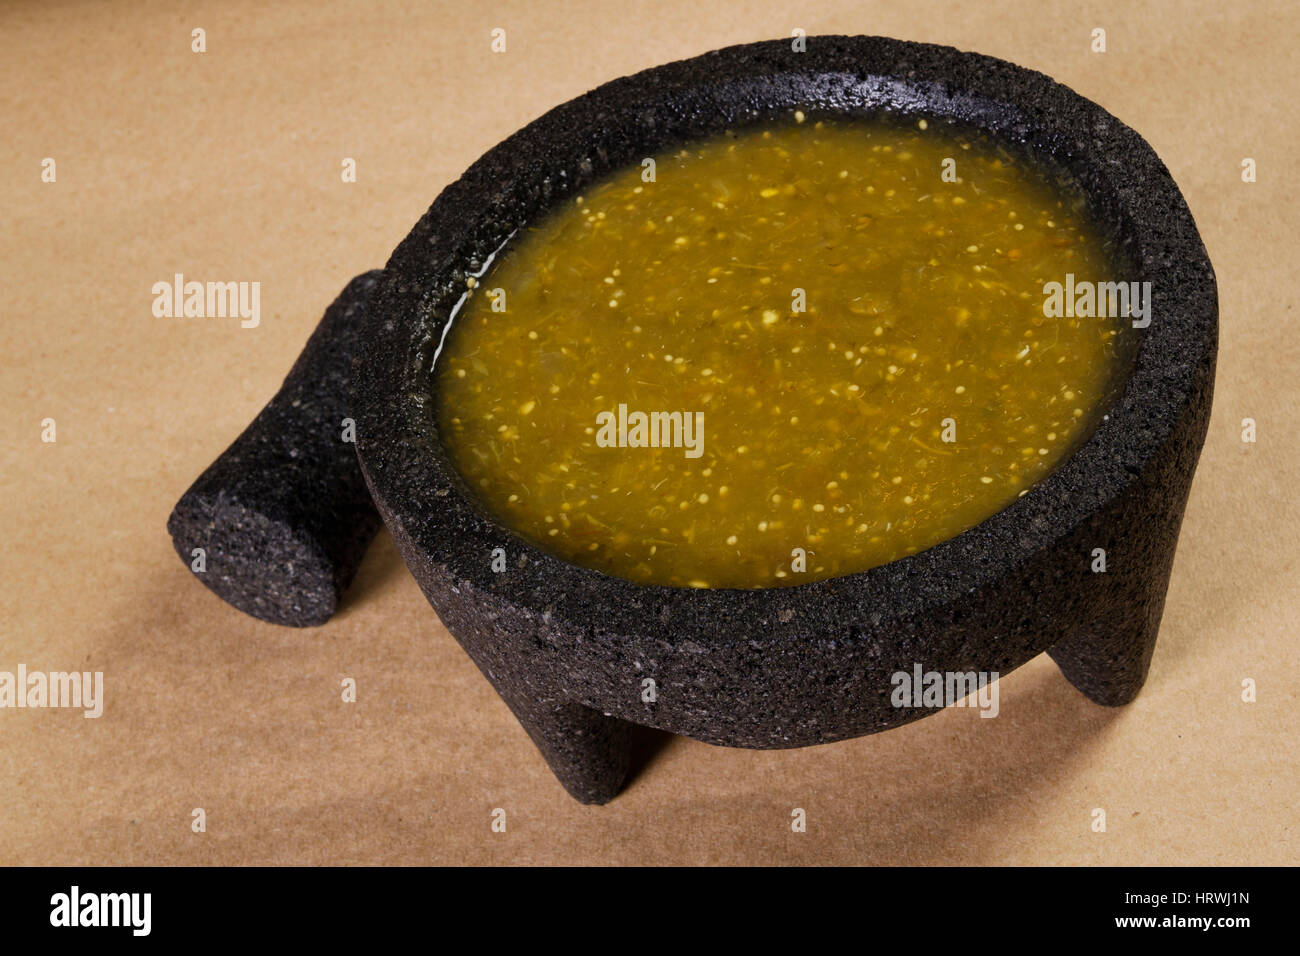 Stock image of mexican salsa verde on mortar and pestle Stock Photo